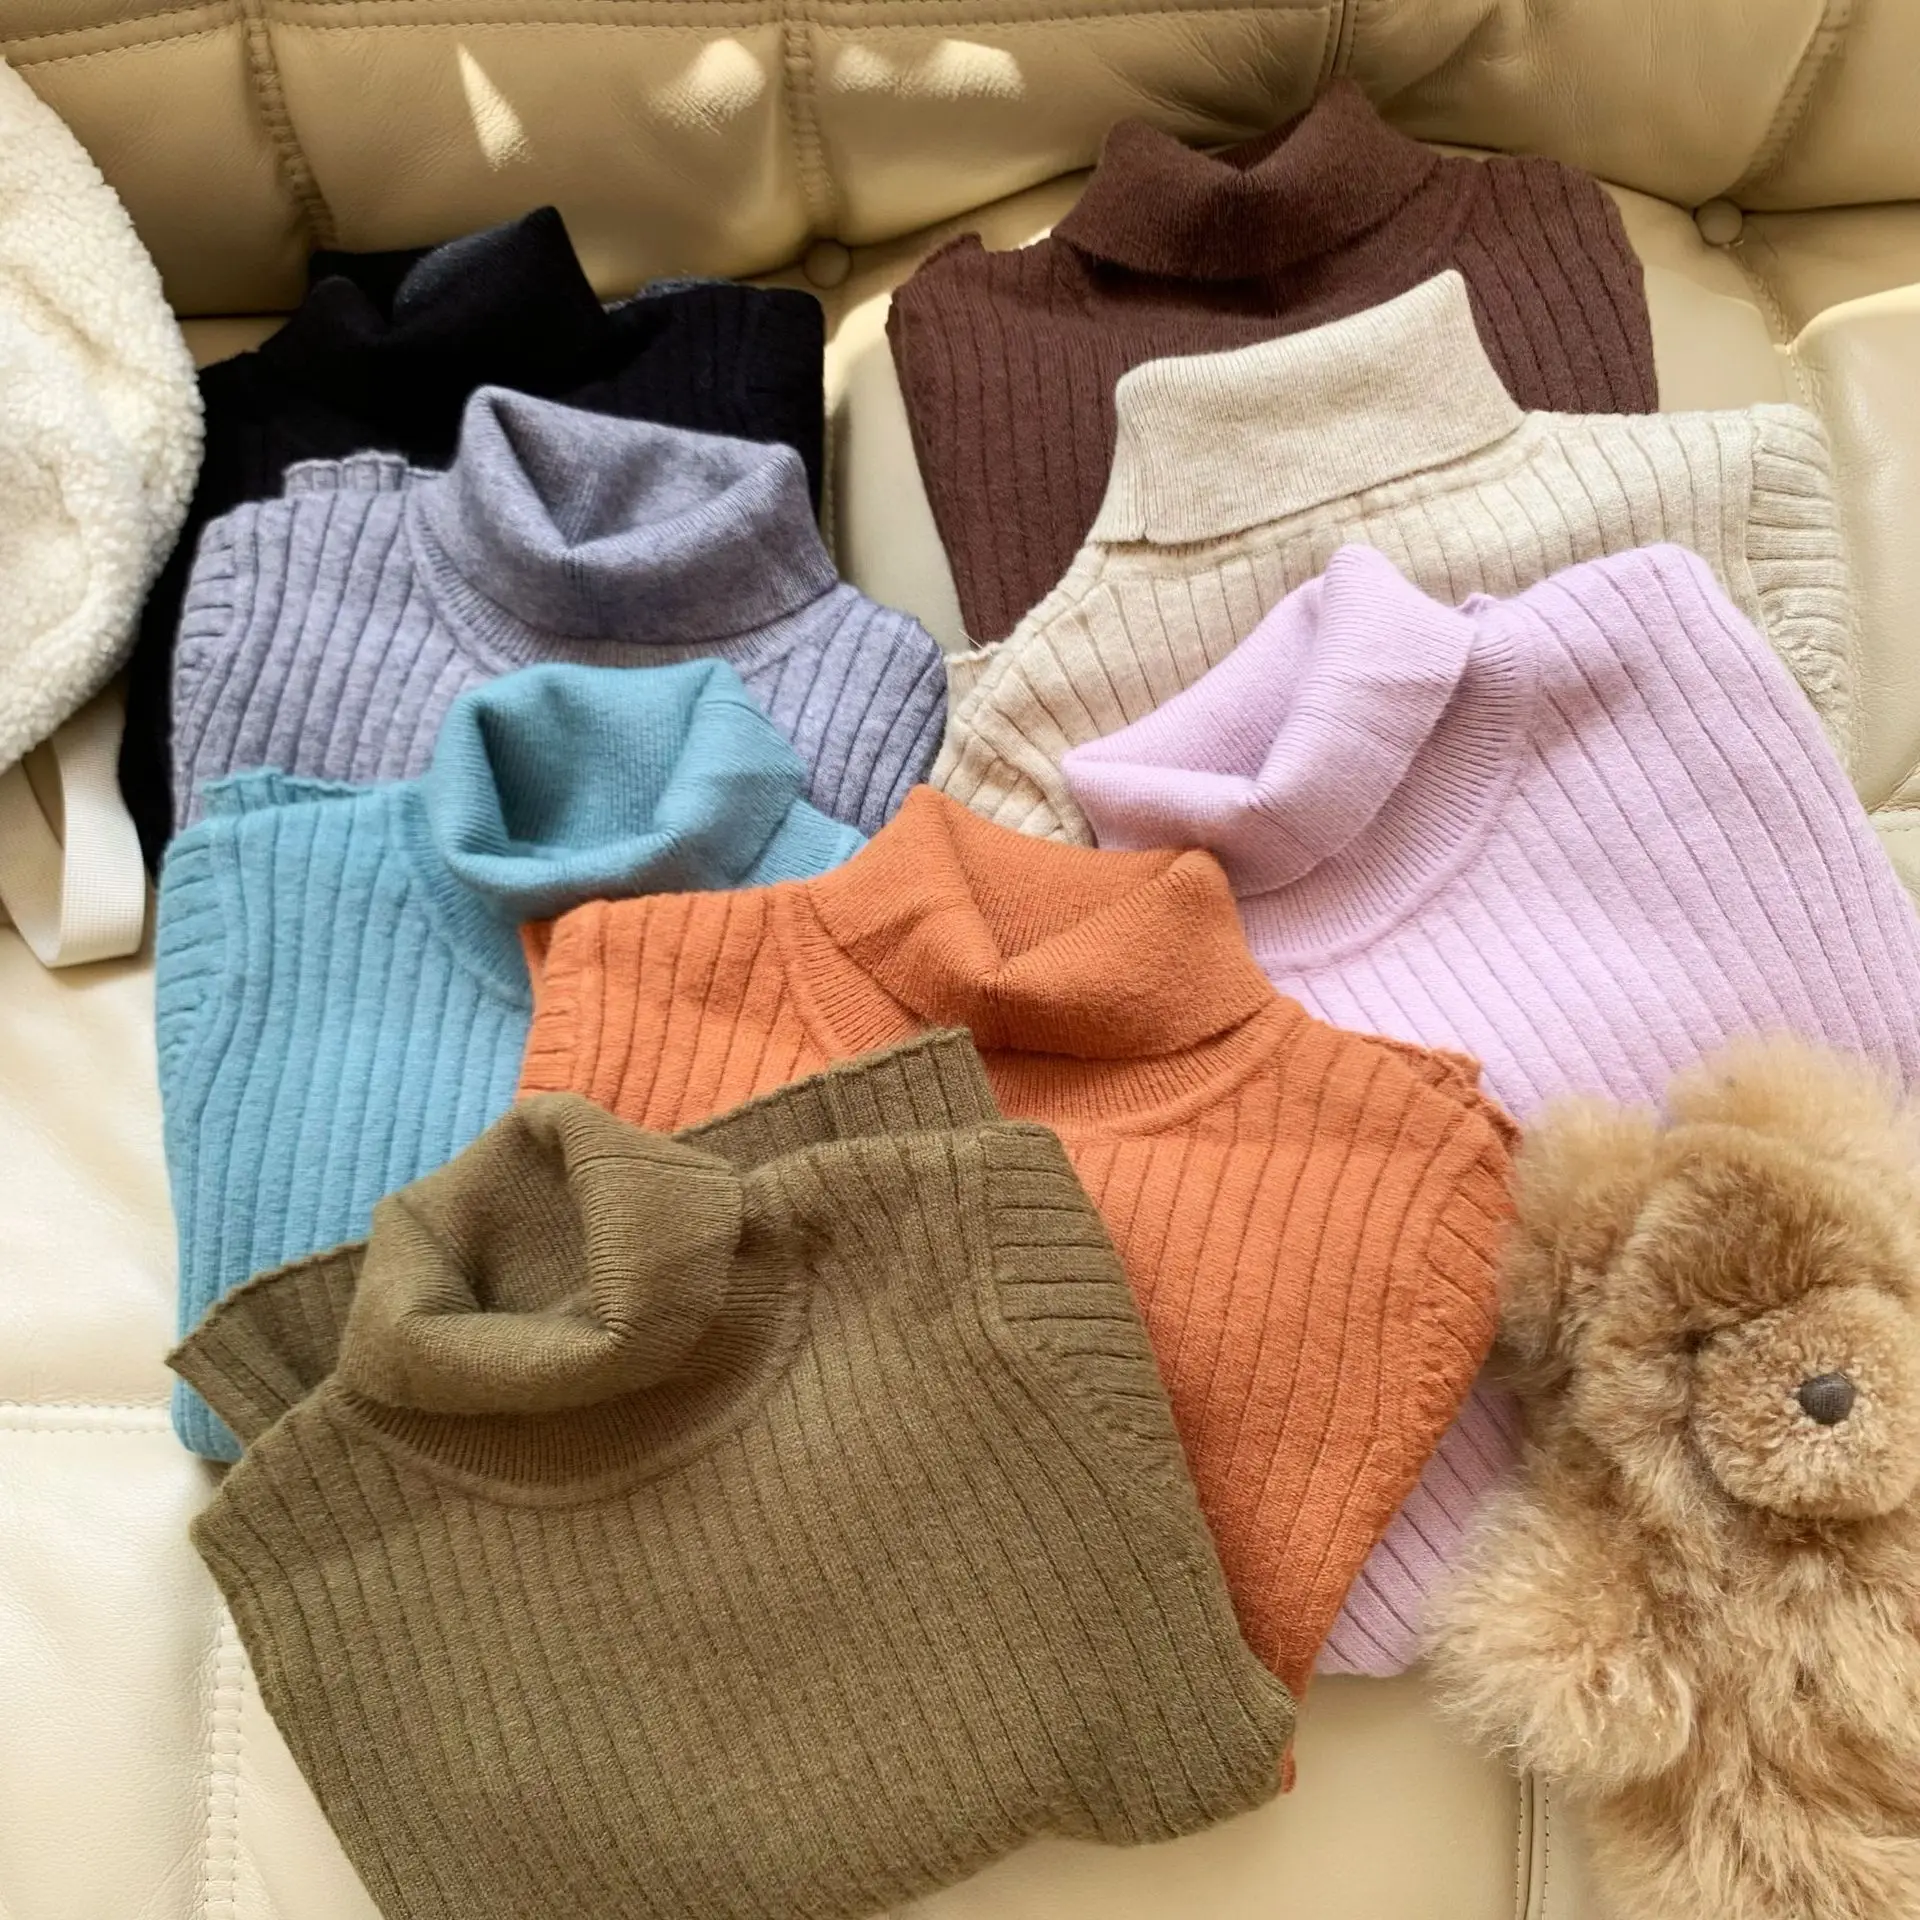 

Autumn Winter Kids Baby Boy Girl Cute Turtleneck Warm Sweaters Simple Casual Basic Pullover Toddler Childrens Sweater Jumper Top